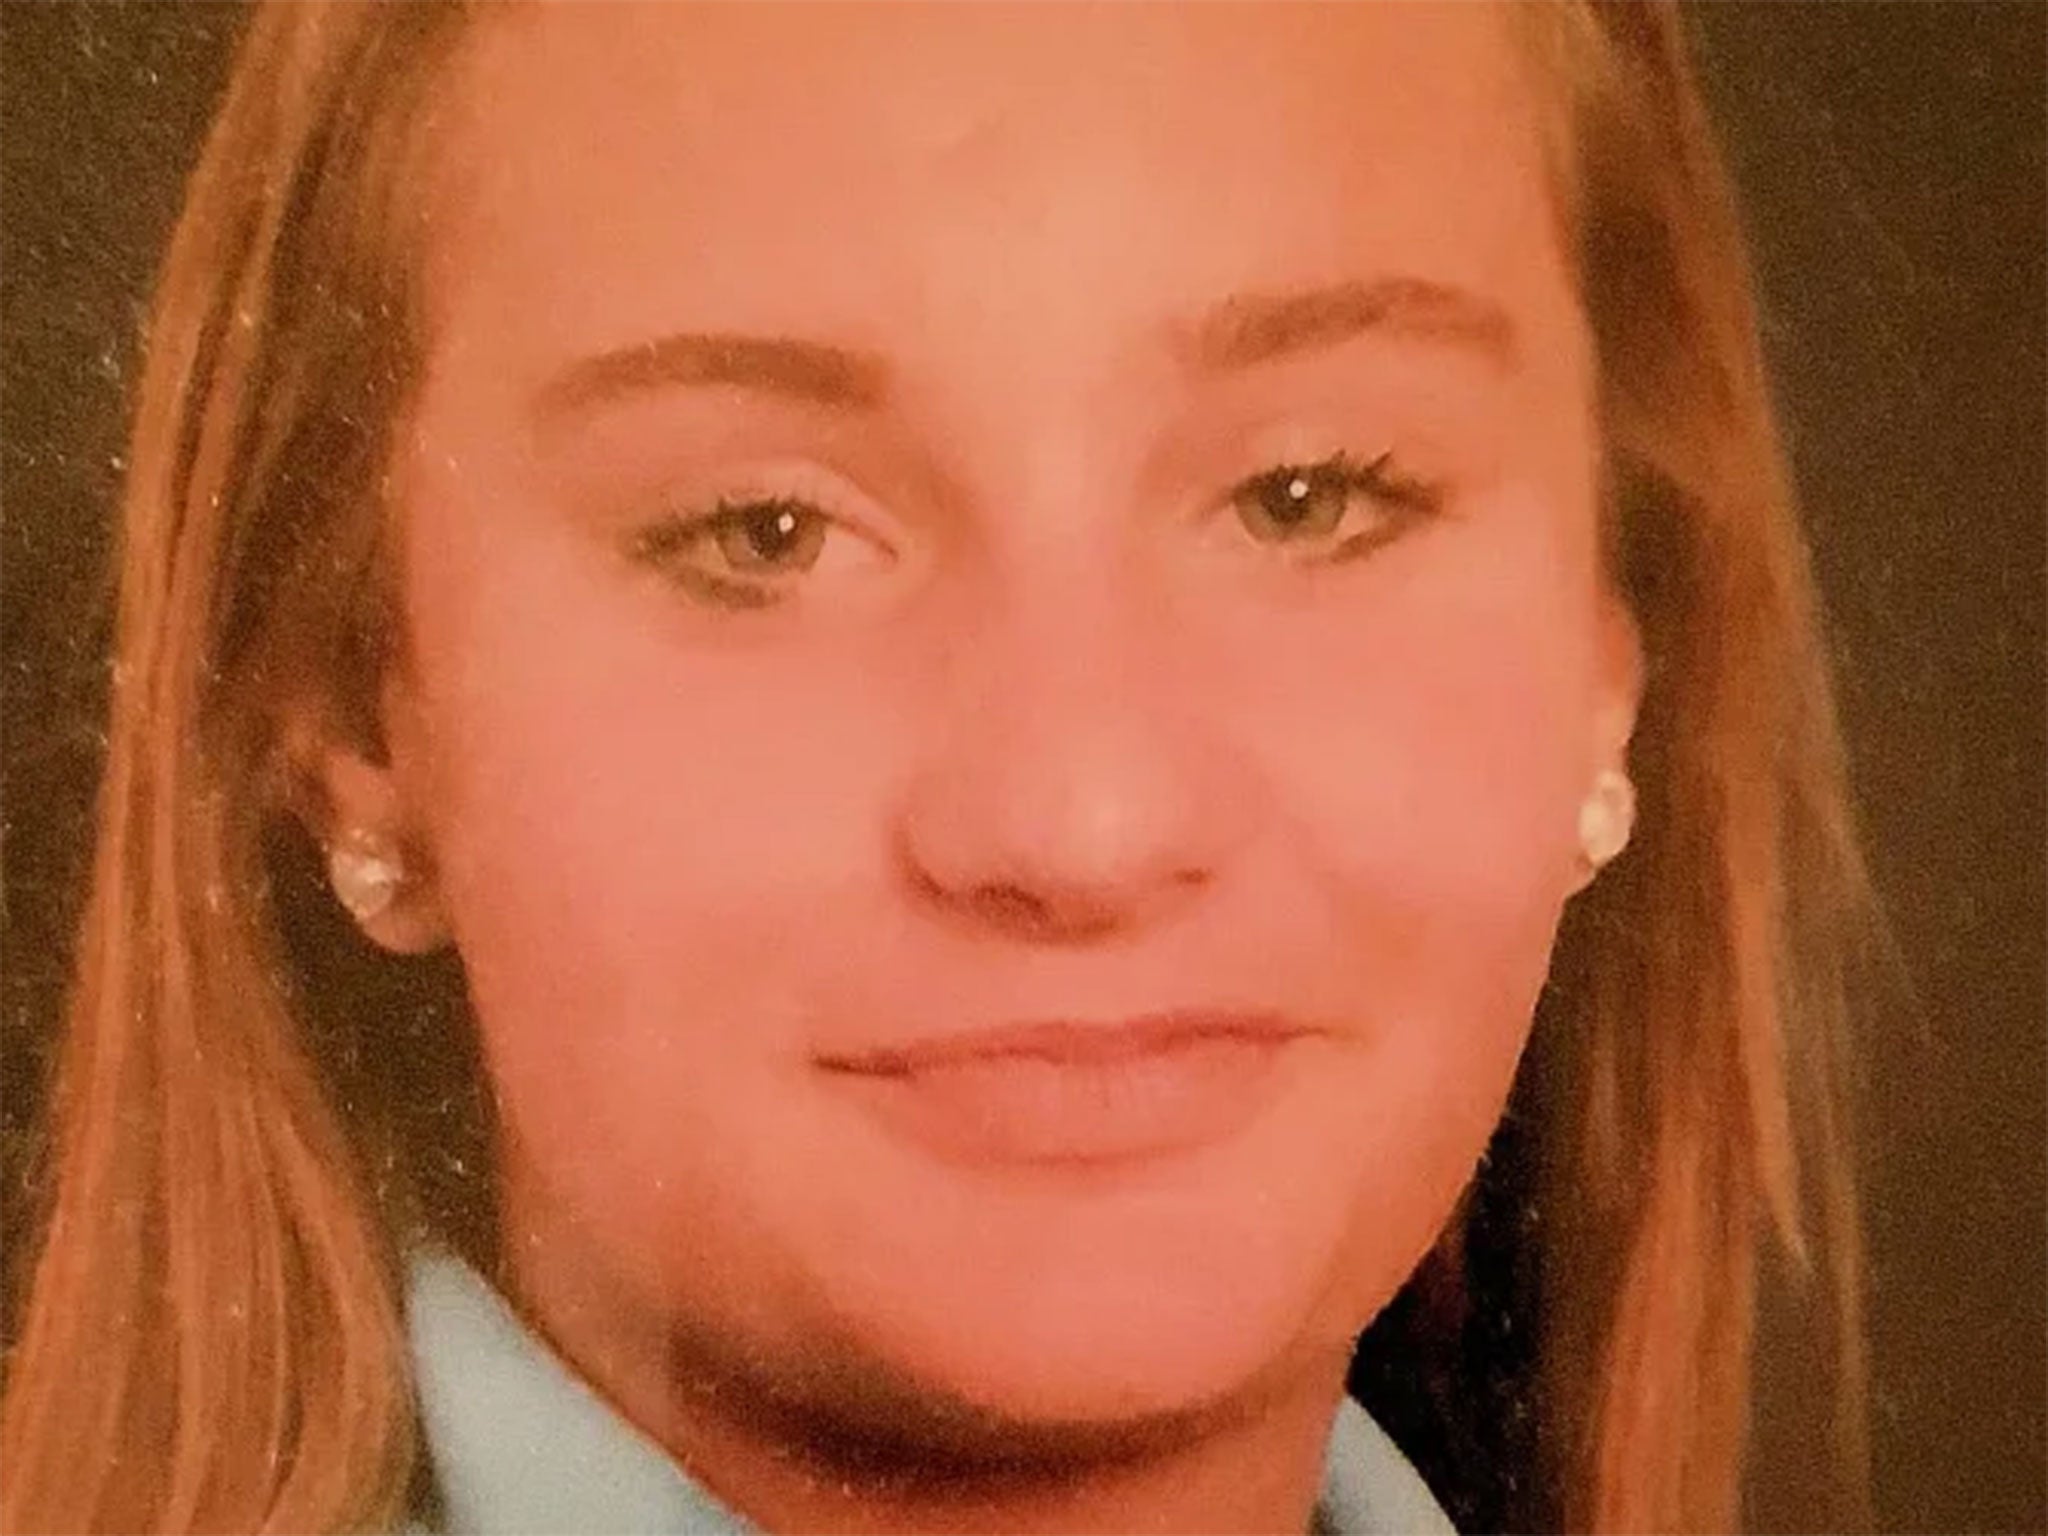 Beth Brown Police Appeal For Witnesses After 15 Year Old Teenager Goes Missing From Party The